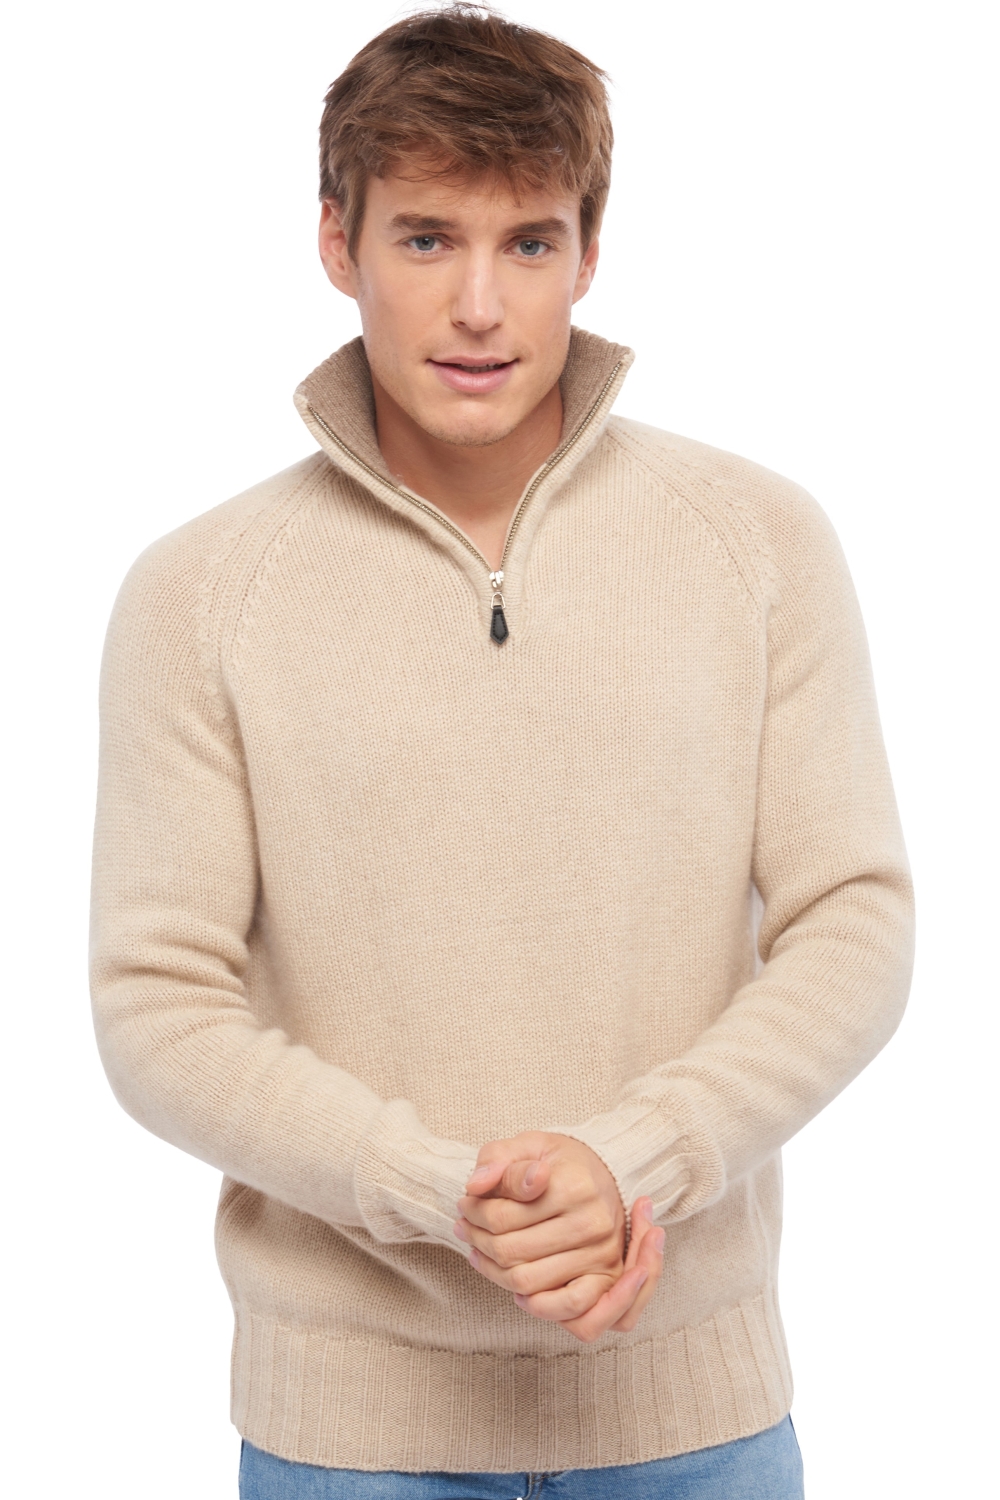 Cachemire pull homme epais olivier natural beige natural brown m